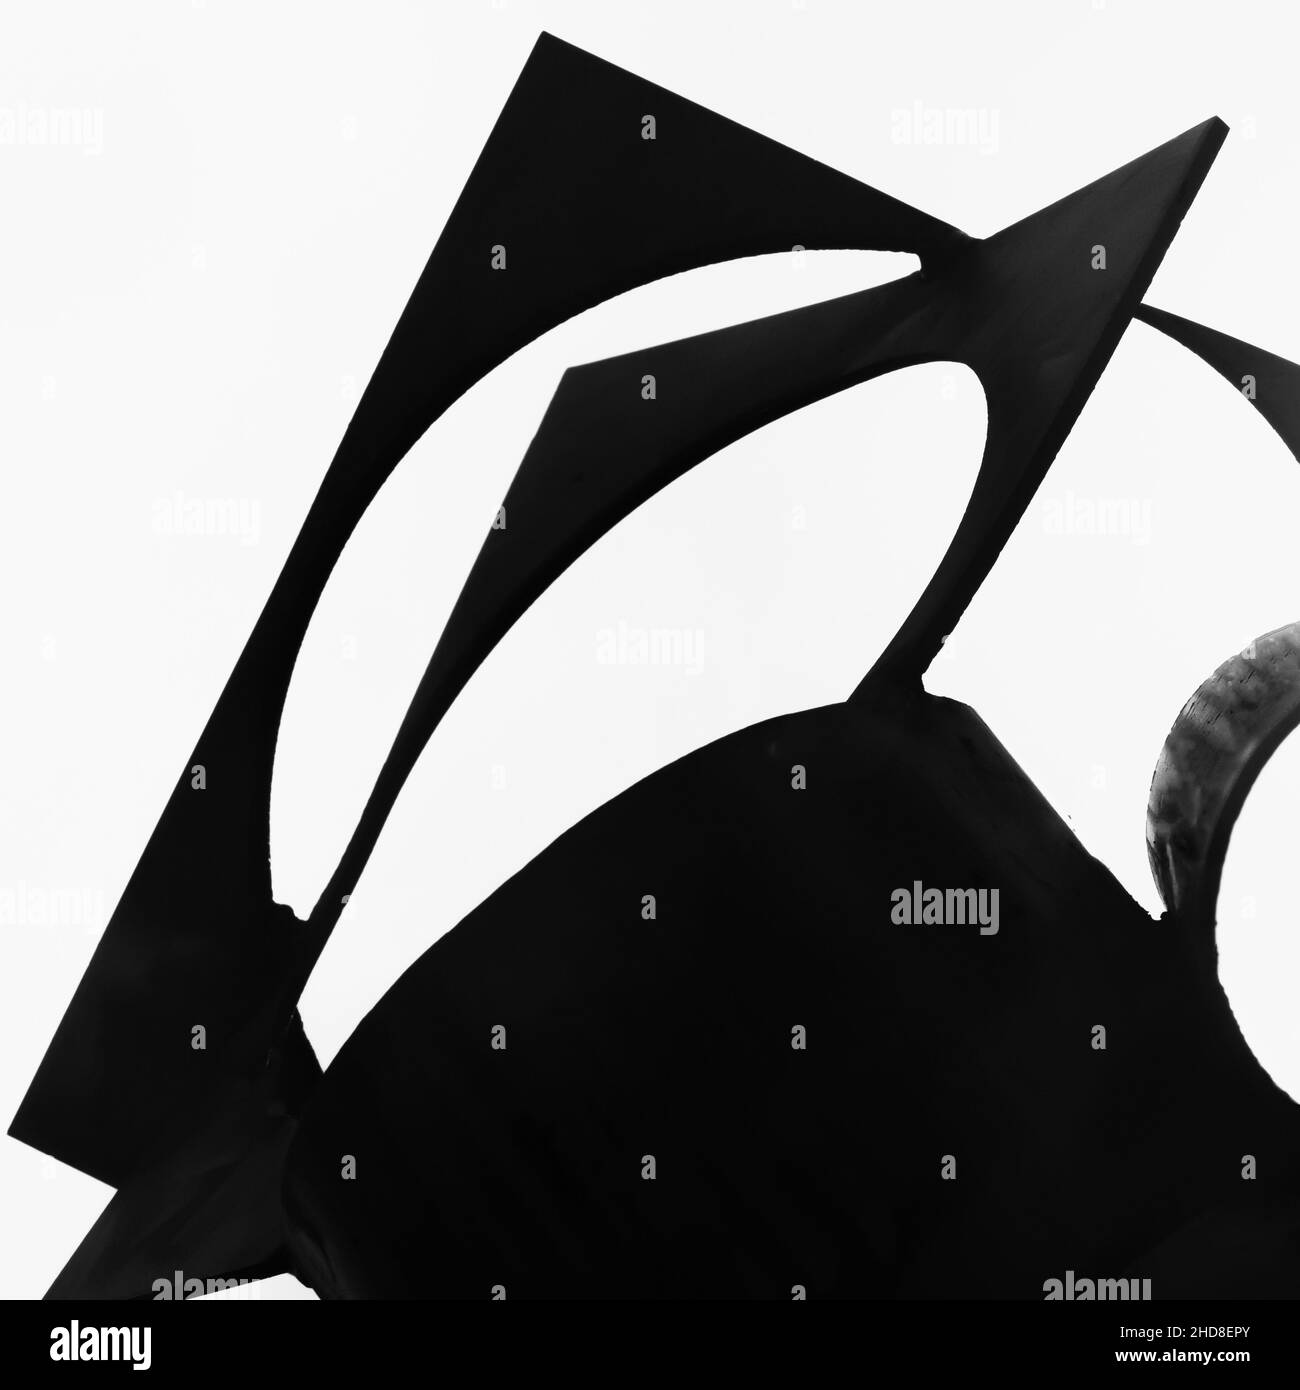 Geometric hapes in black and white Stock Photo